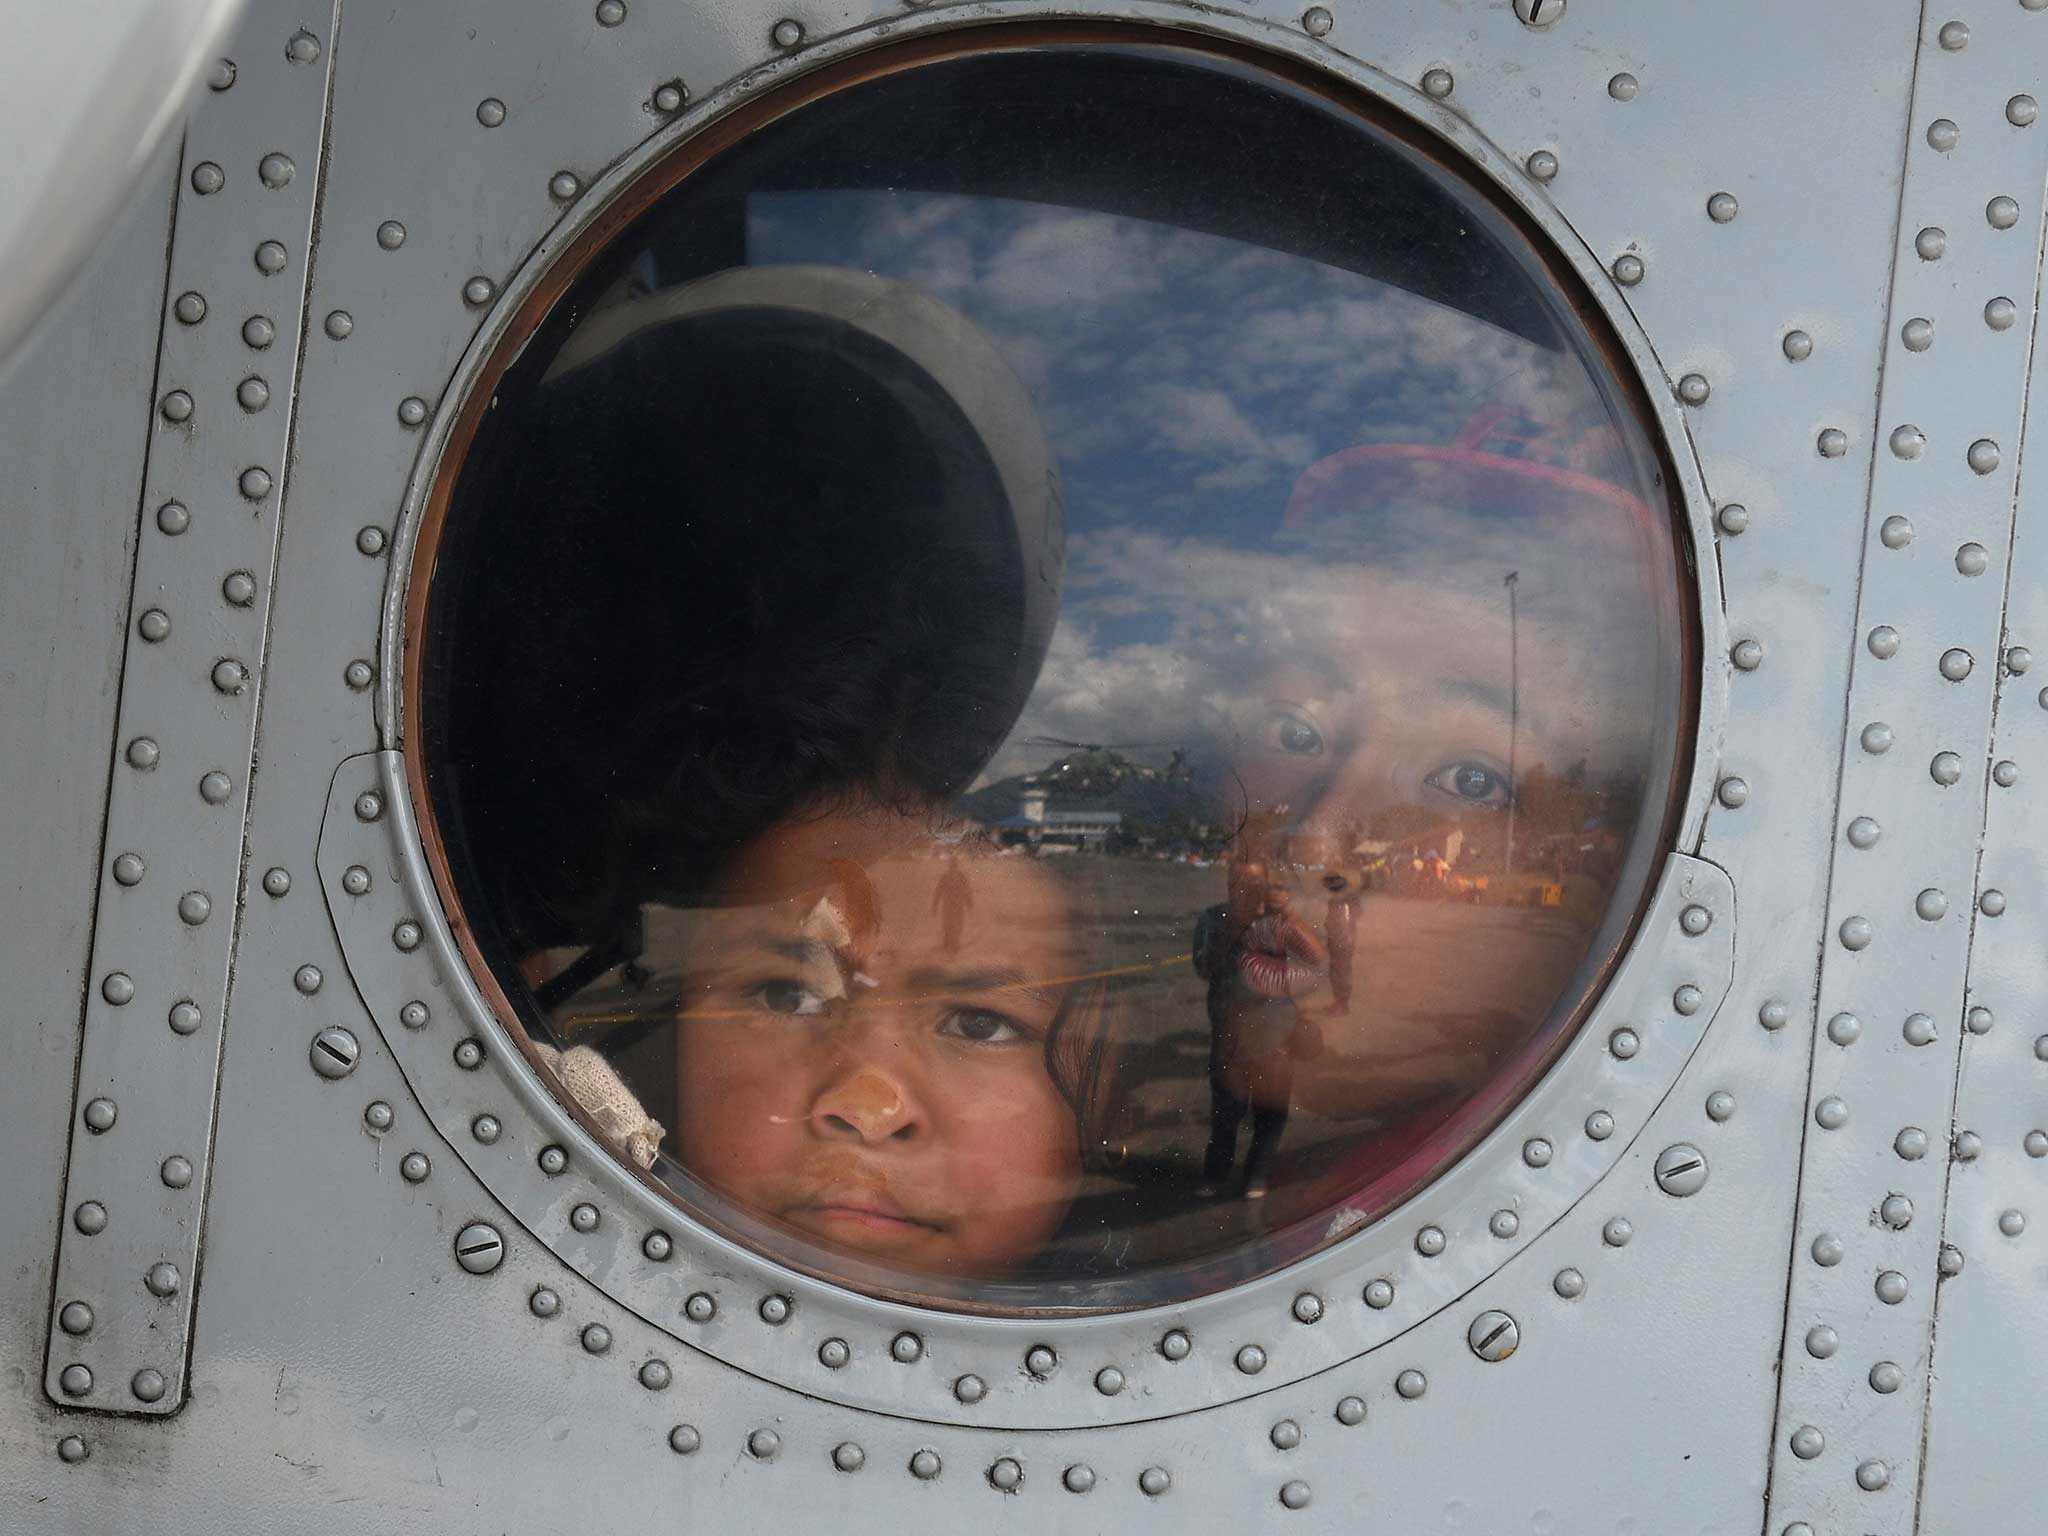 Nepalese children sit inside an Indian Air Force chopper after they were rescued from an earthquake-hit village